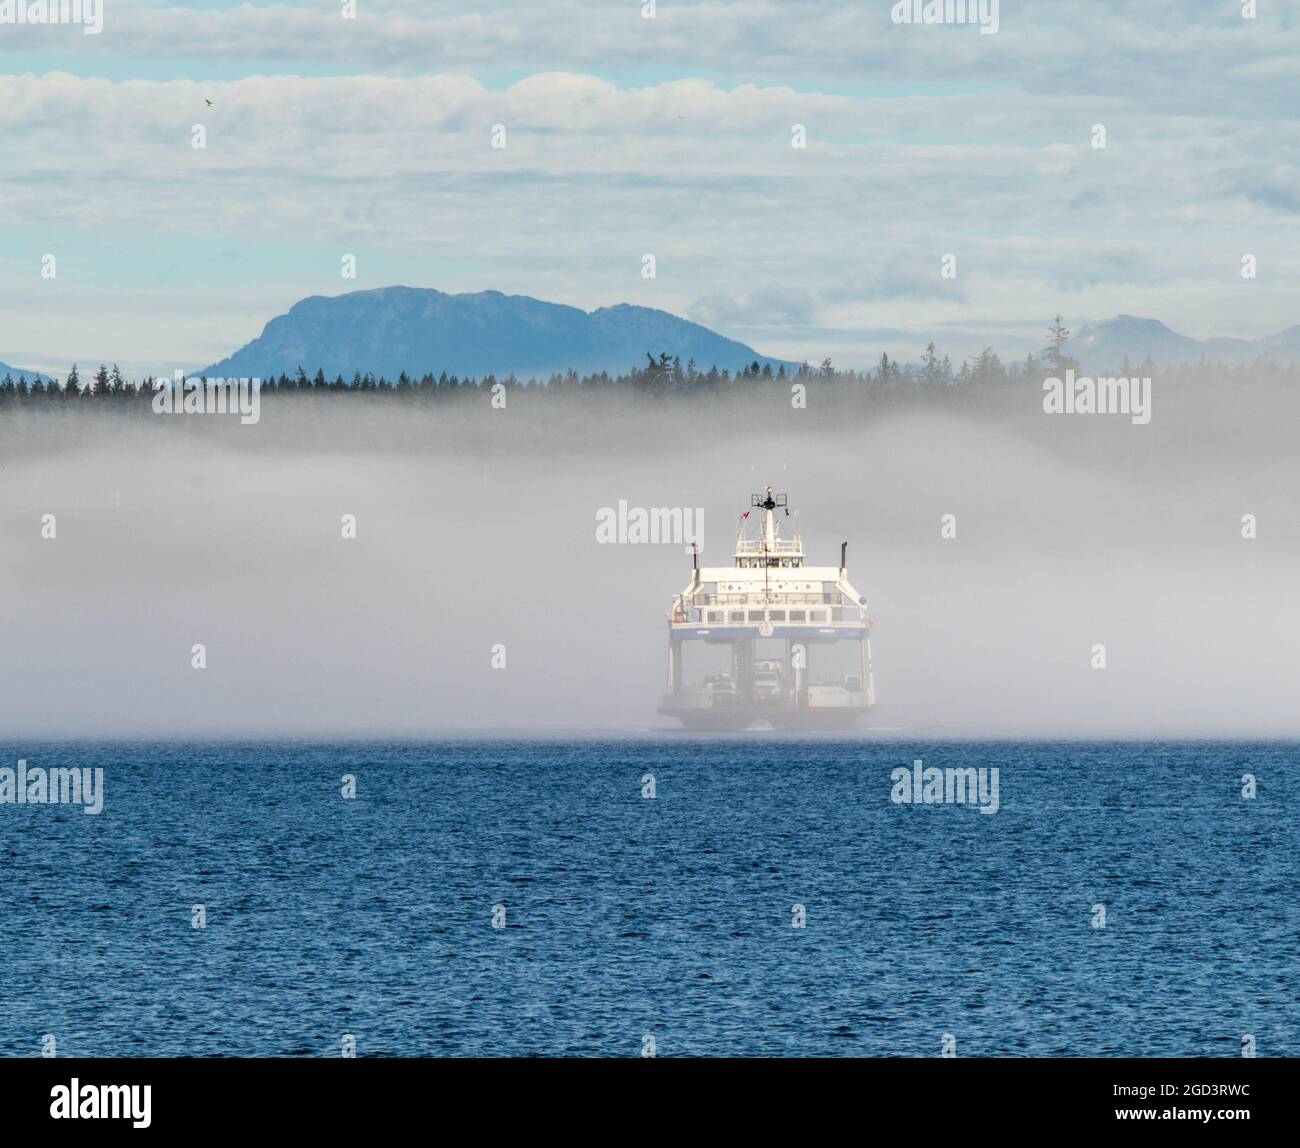 Car ferry crossing Discovery Passage in BC, Canada.  Blue water, mountain and forest in background, ferry partially obscured by fog. Stock Photo